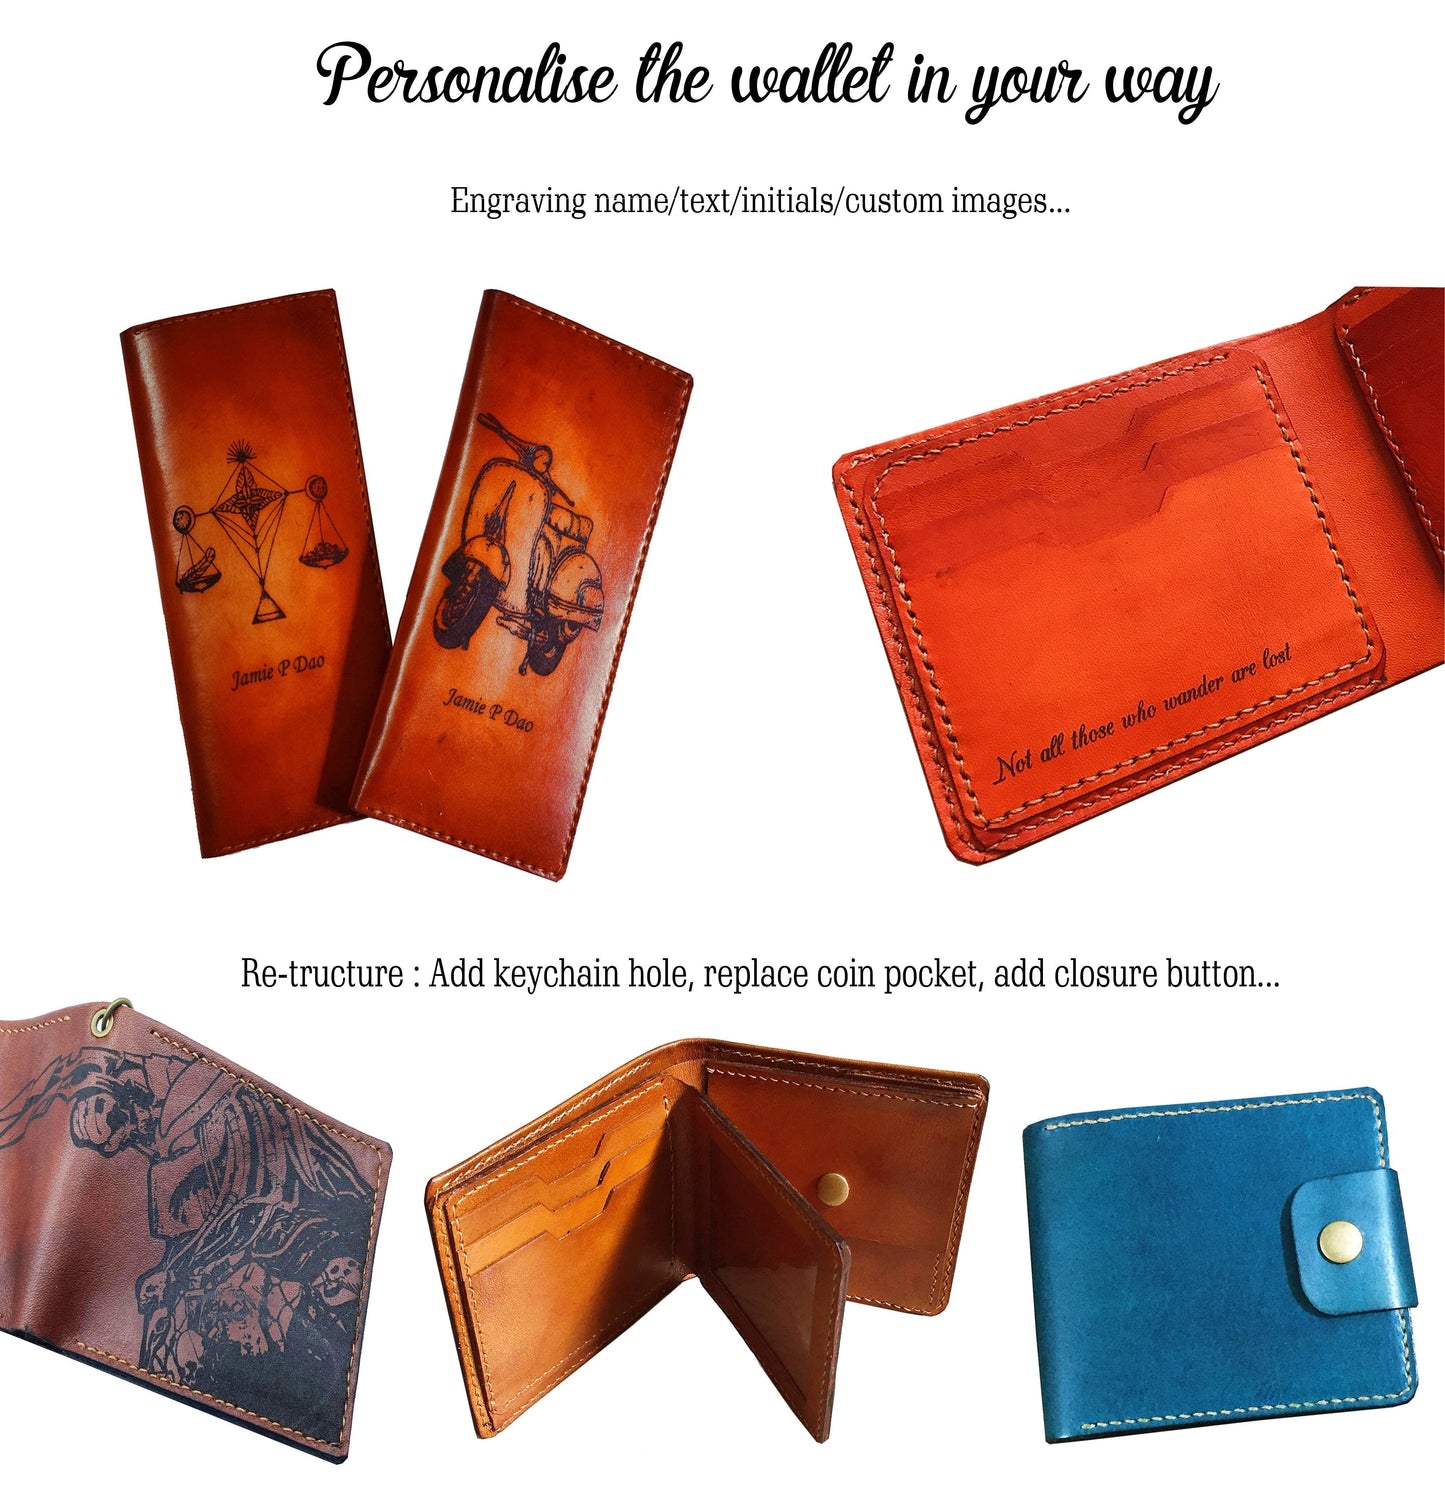 Mayan Corner - Superheroes leather handmade wallet, customized men's wallet, Leather gift ideas for men - The Punisher logo wallet